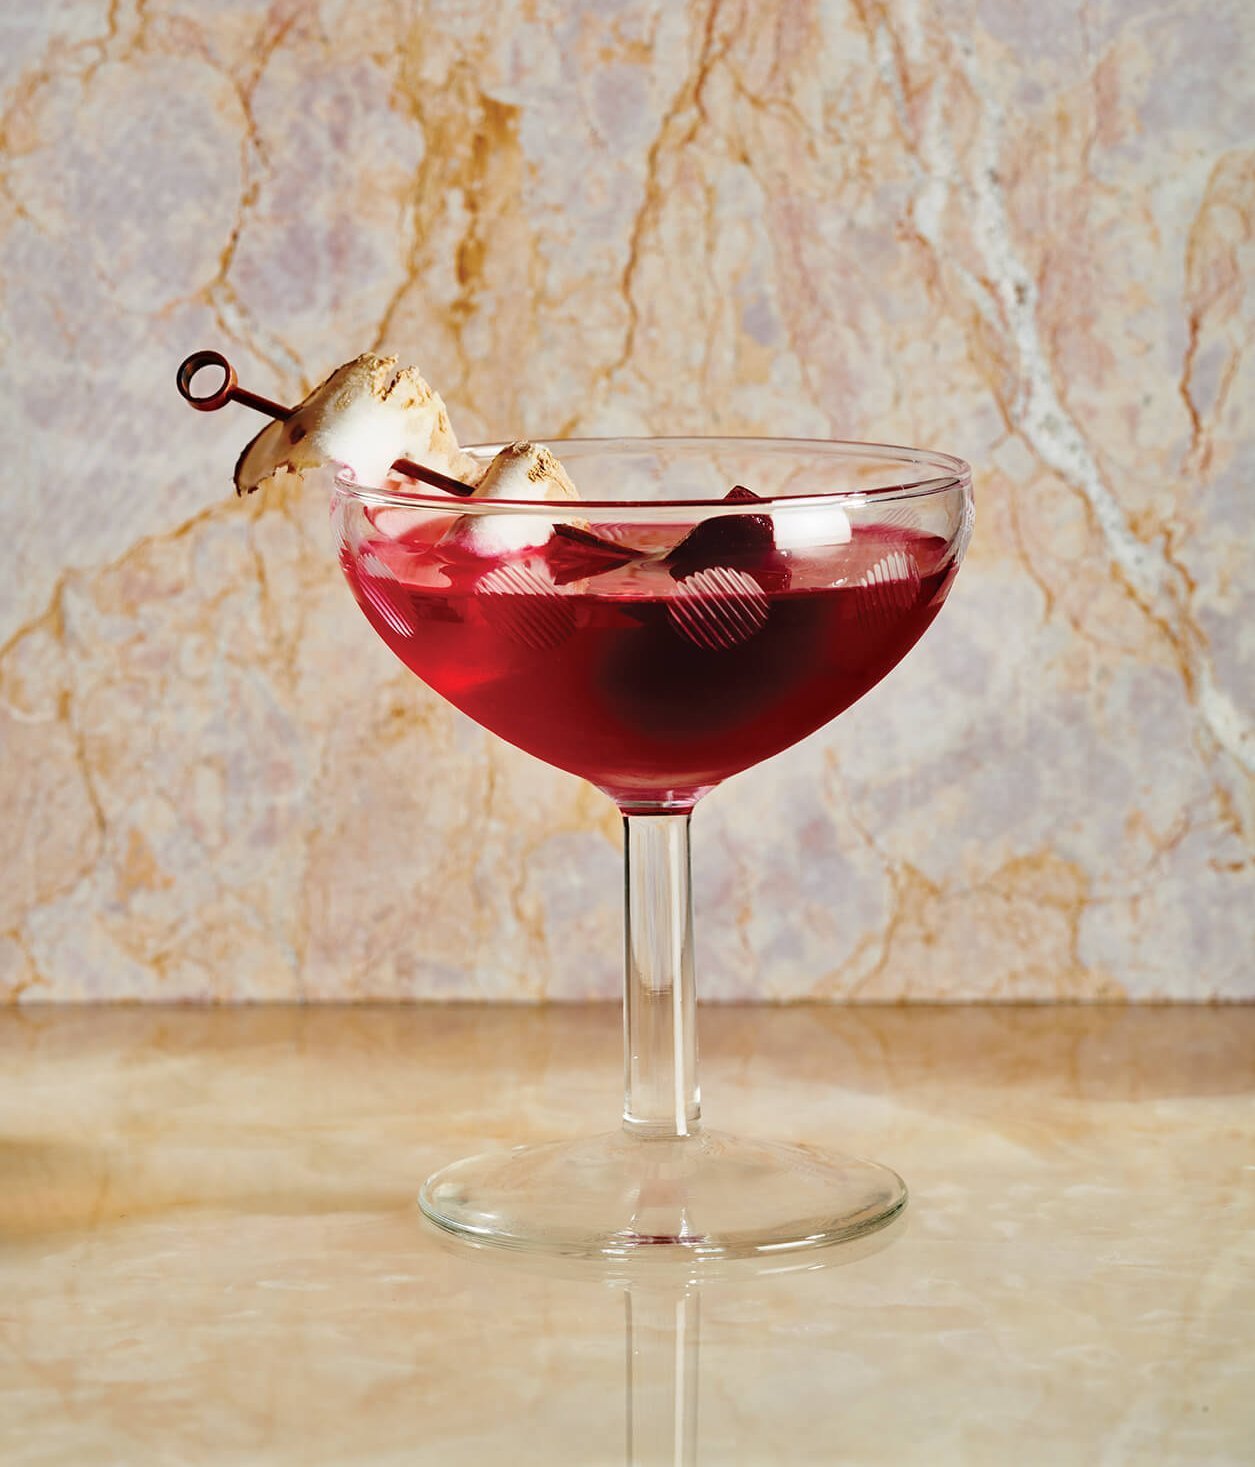 A dark red cocktail on a marble surface